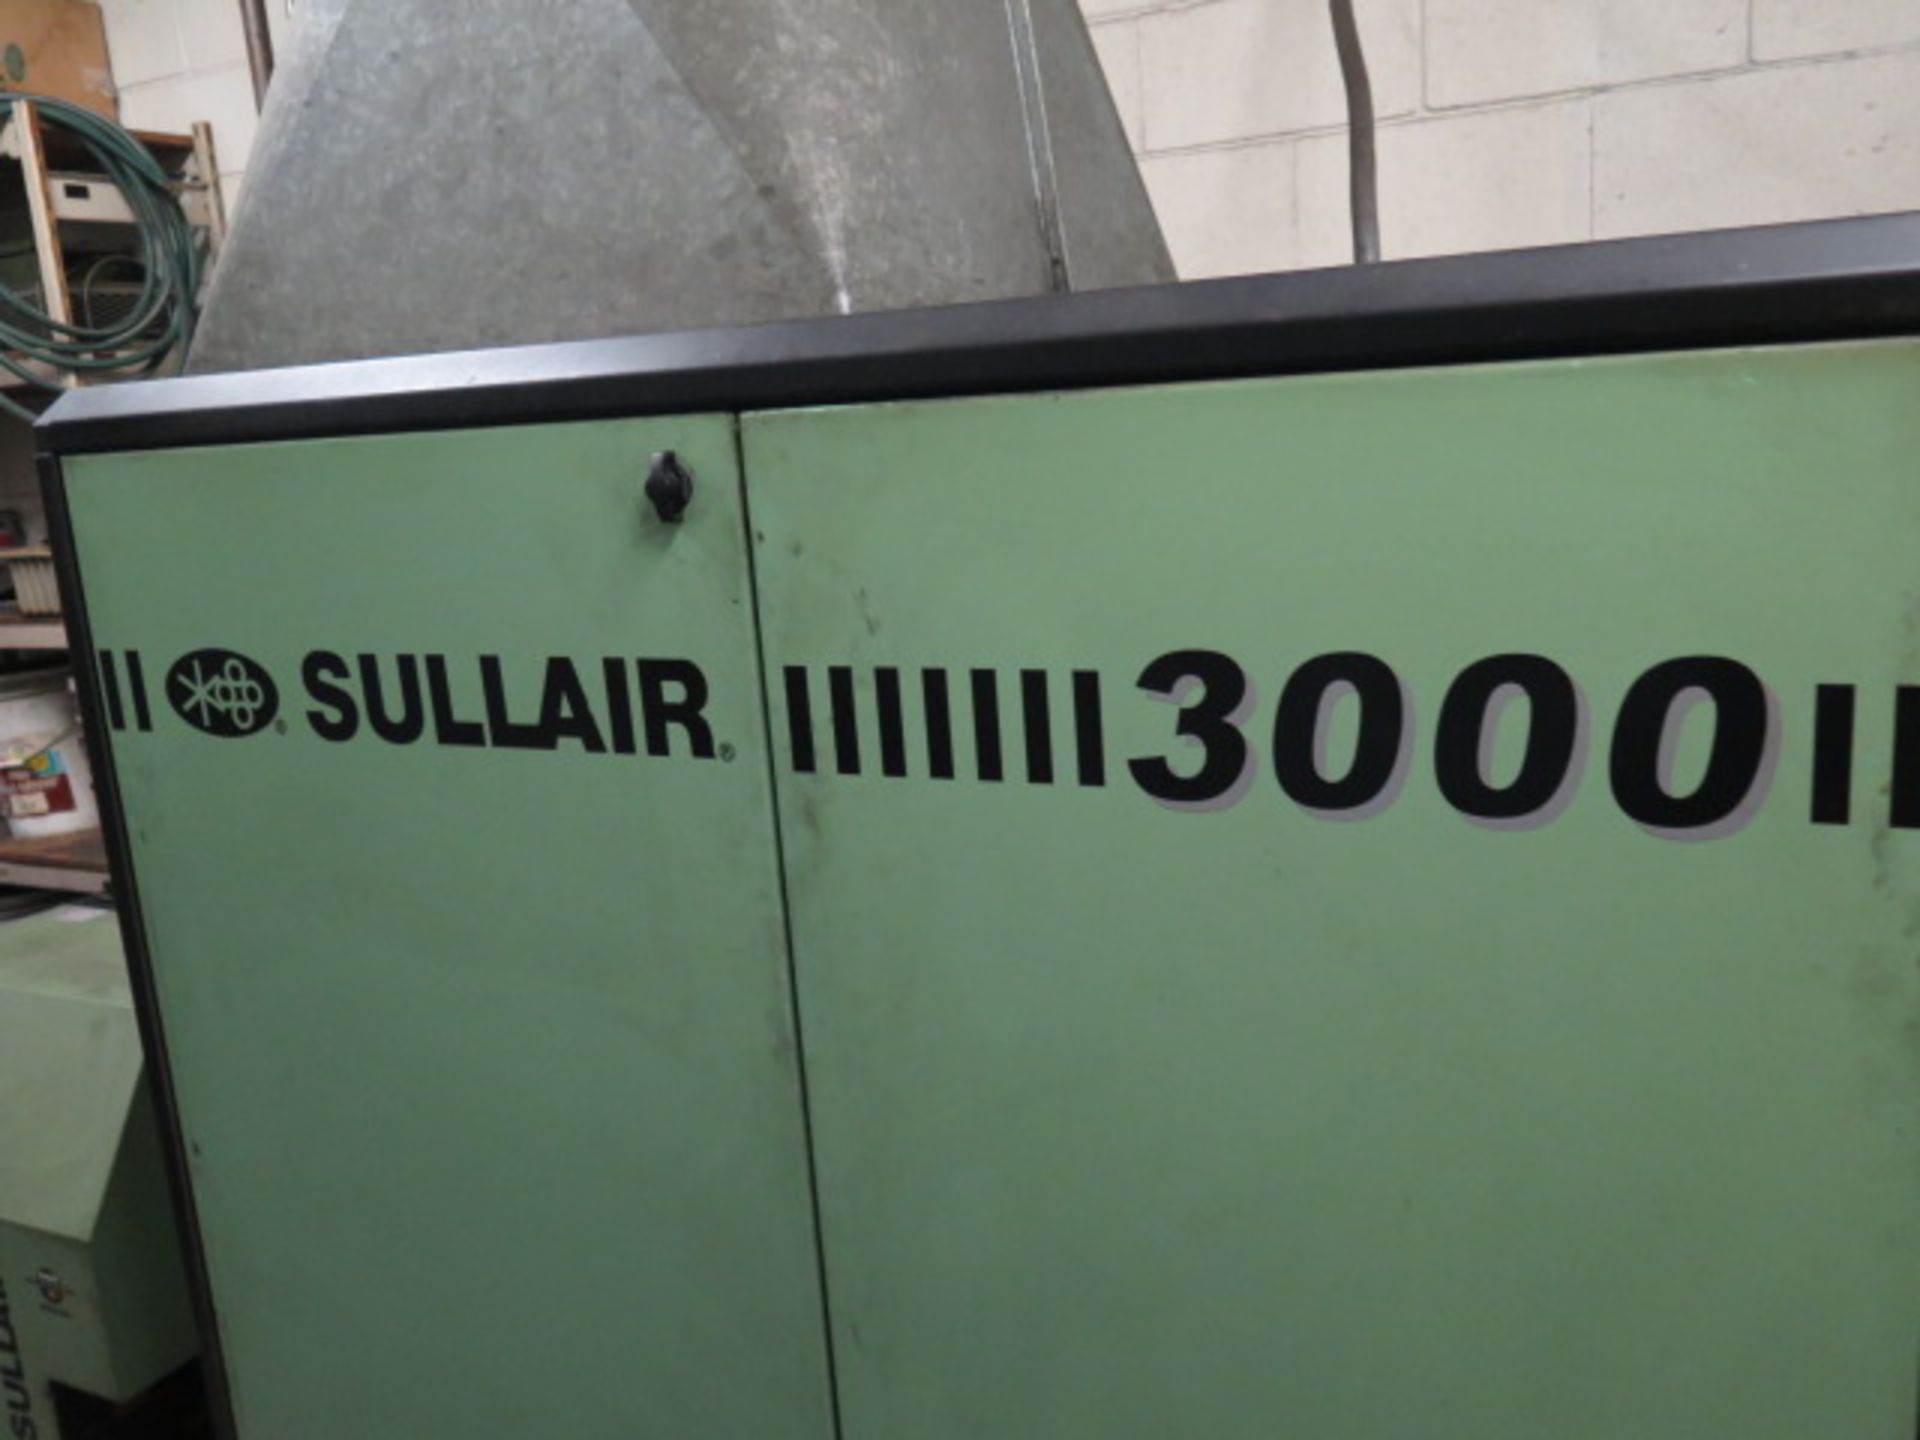 Sullair mdl. 3009VA Rotary Air Compressor s/n 200703150093 w/ Digital Controls, Sullair Refrigerated - Image 4 of 7